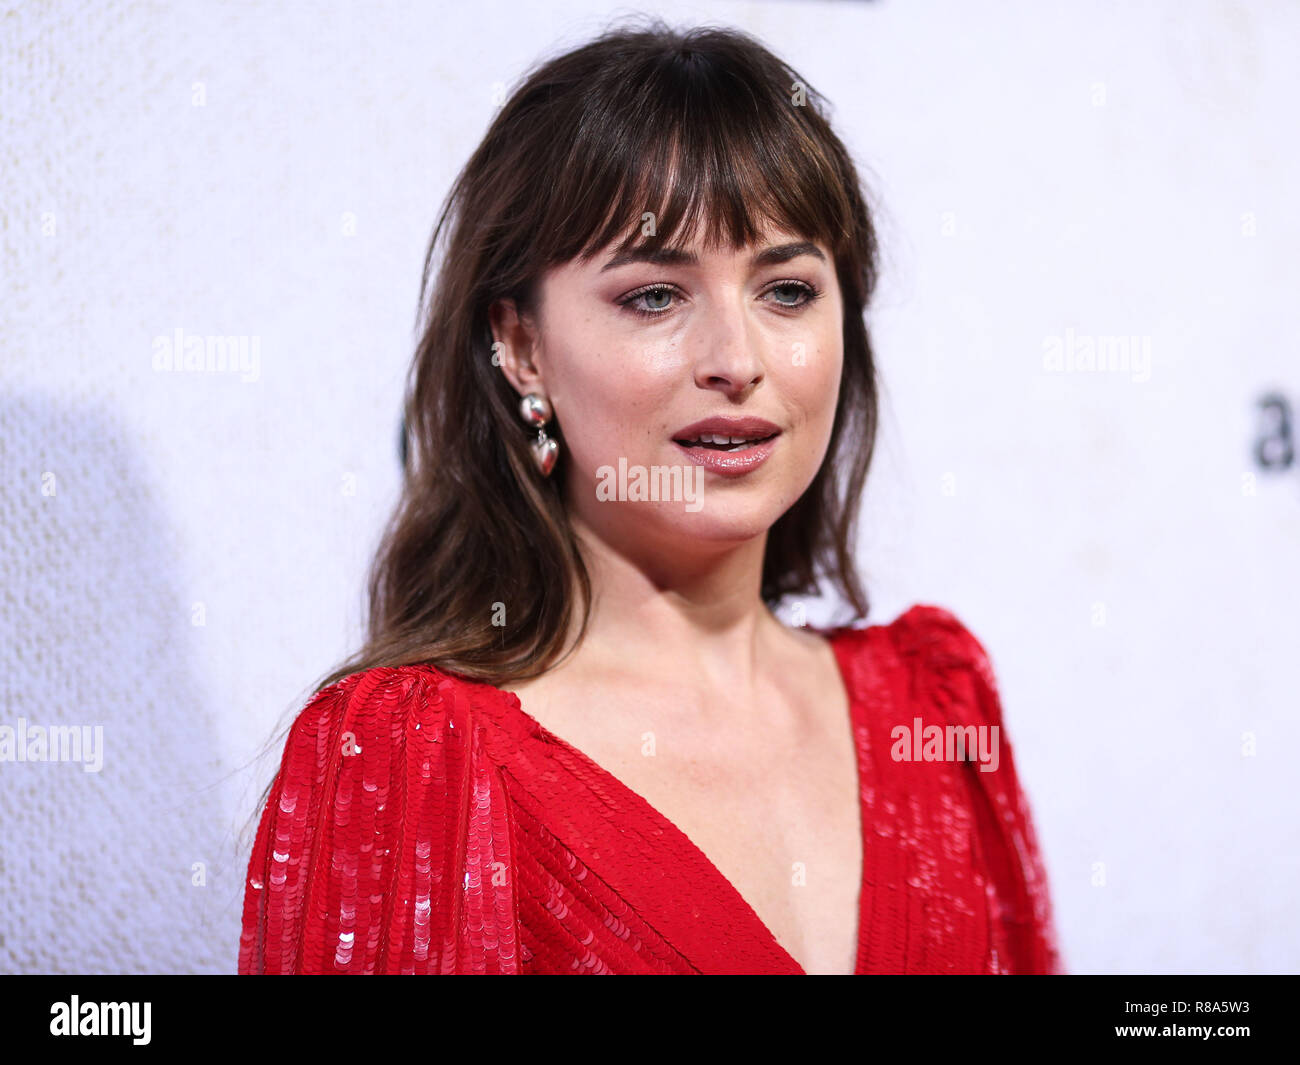 HOLLYWOOD, LOS ANGELES, CA, USA - OCTOBER 24: Actress Dakota Johnson wearing a Celine dress, Sophie Buhai earrings, and Giuseppe Zanotti heels arrives at the Los Angeles Premiere Of Amazon Studio's 'Suspiria' held at the ArcLight Cinerama Dome on October 24, 2018 in Hollywood, Los Angeles, California, United States. (Photo by Xavier Collin/Image Press Agency) Stock Photo